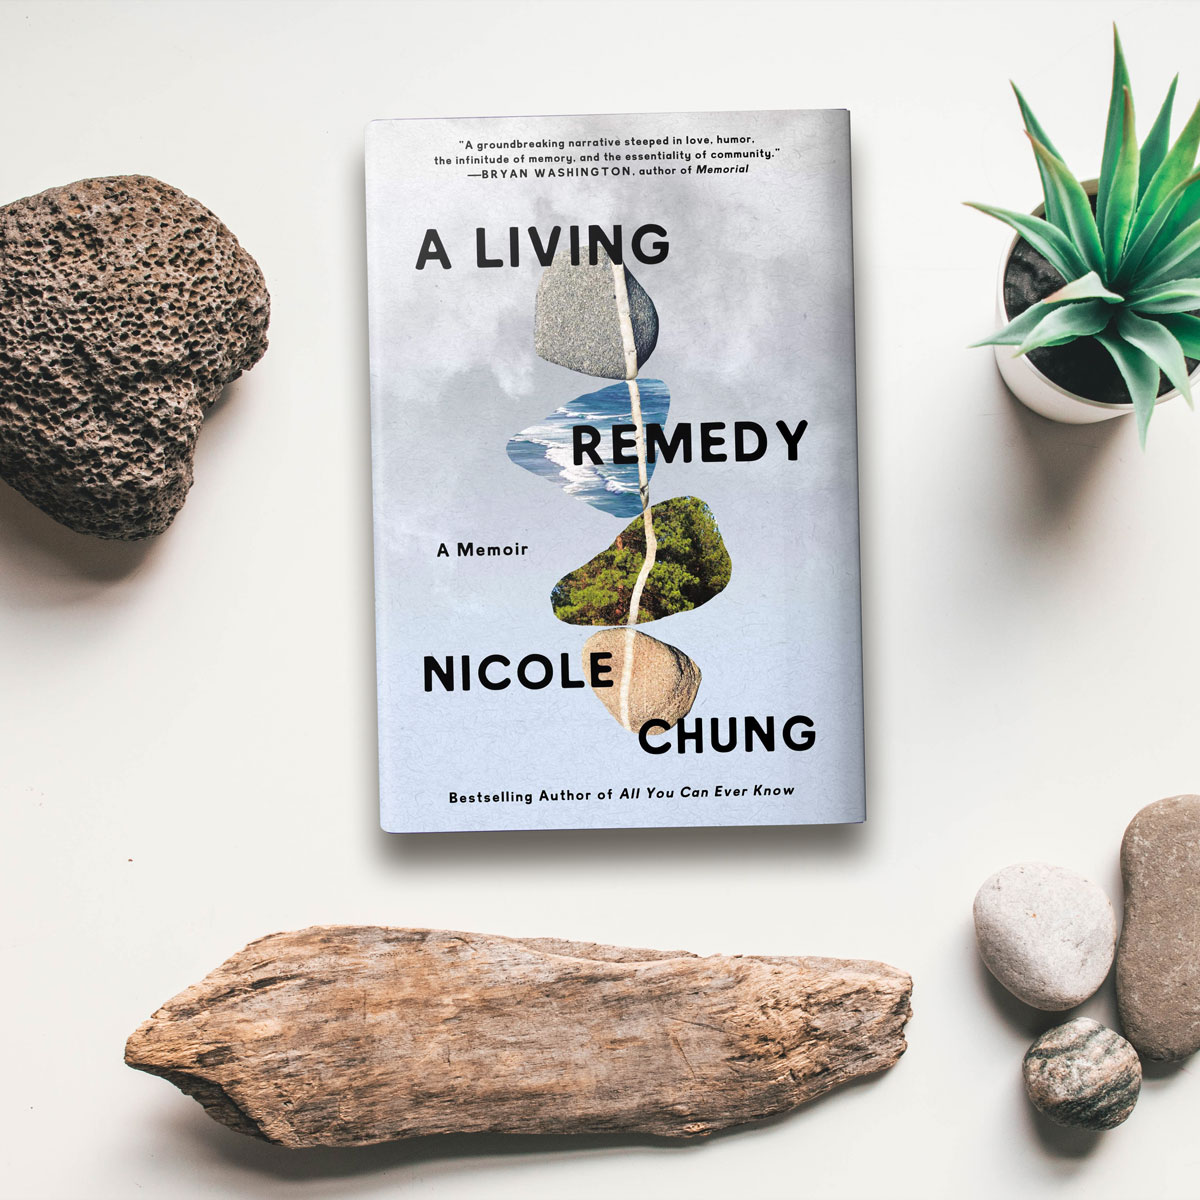 Stylized photo of A Living Remedy by Nicole Chung